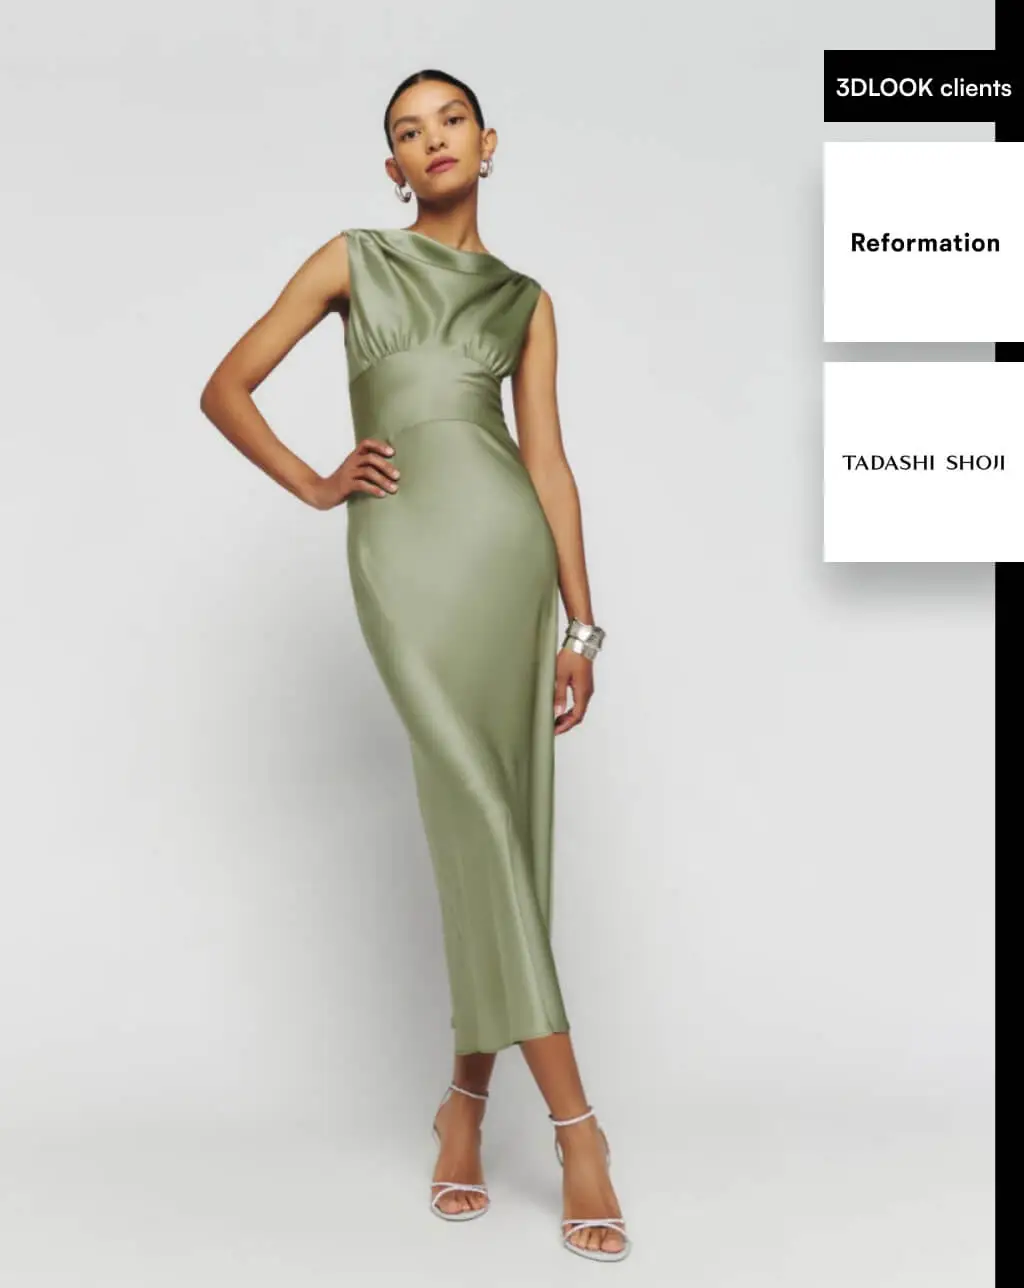 An AI-powered mobile tailor is capturing body measurements of a woman posing in a green dress.